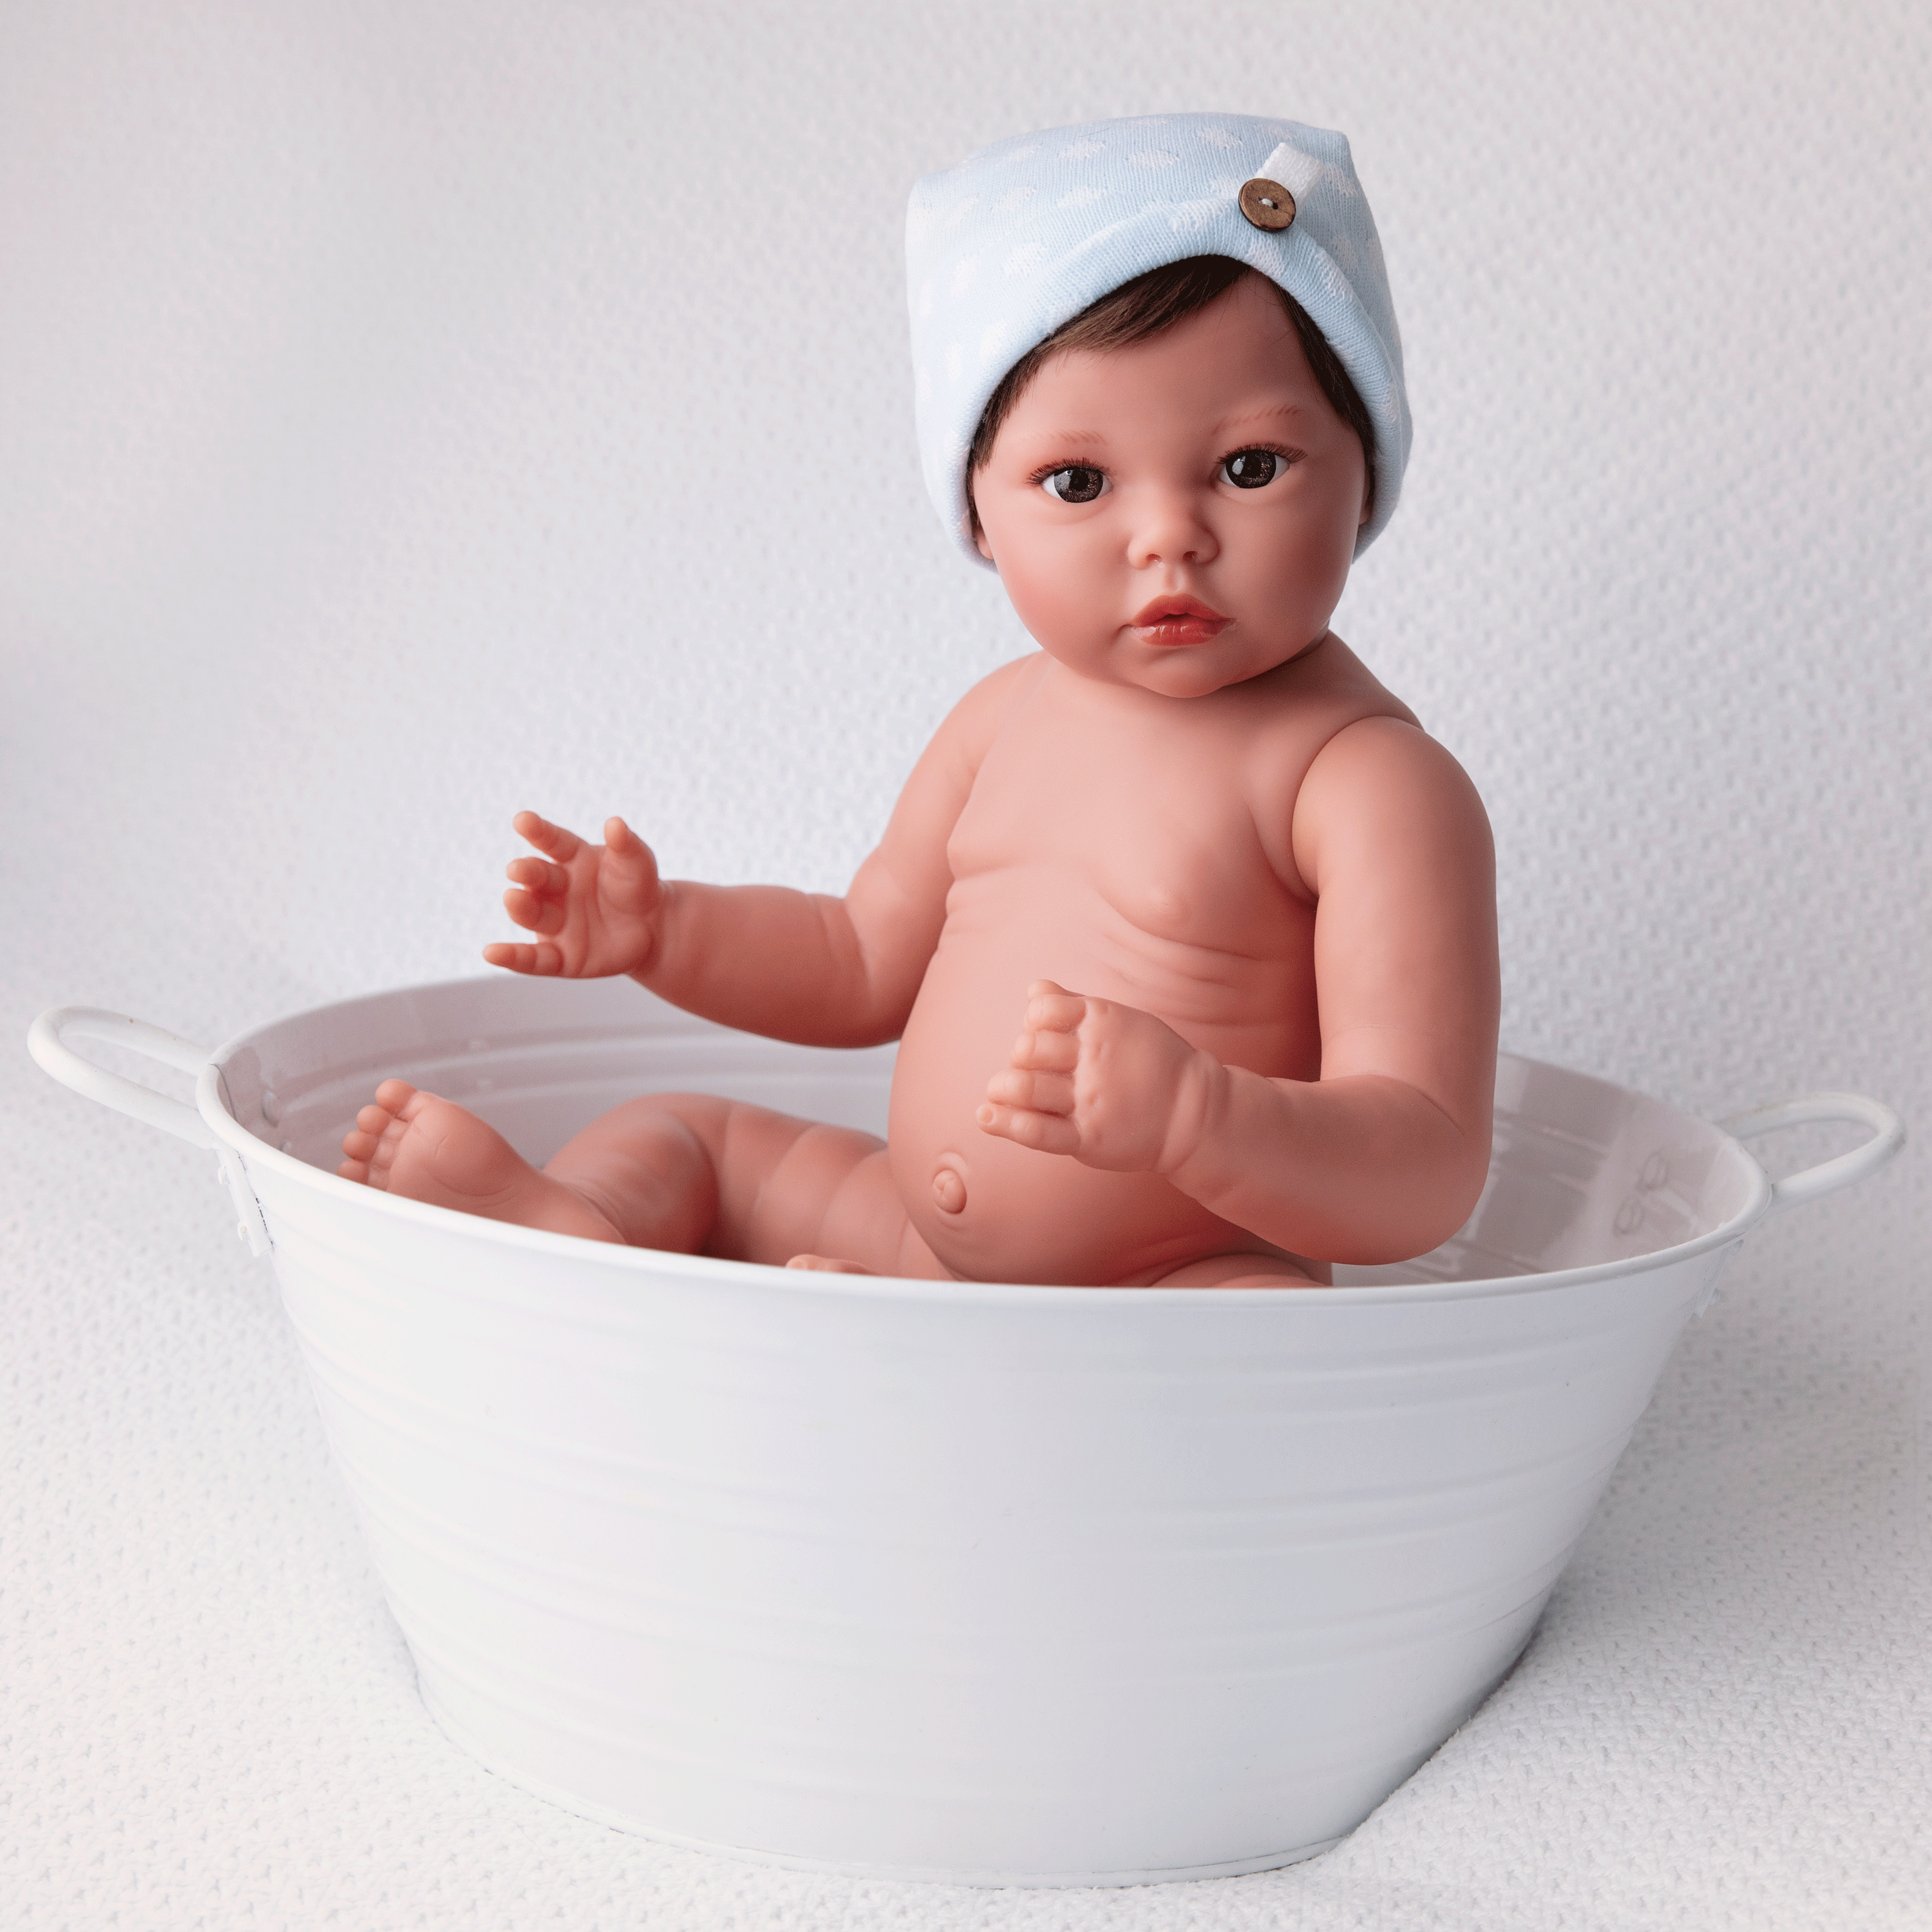 Reborn Baby Doll Reborn BOY - ROMEO 52CM and 2KG - FULL SILICONE VINYL BODY and BATHABLE 